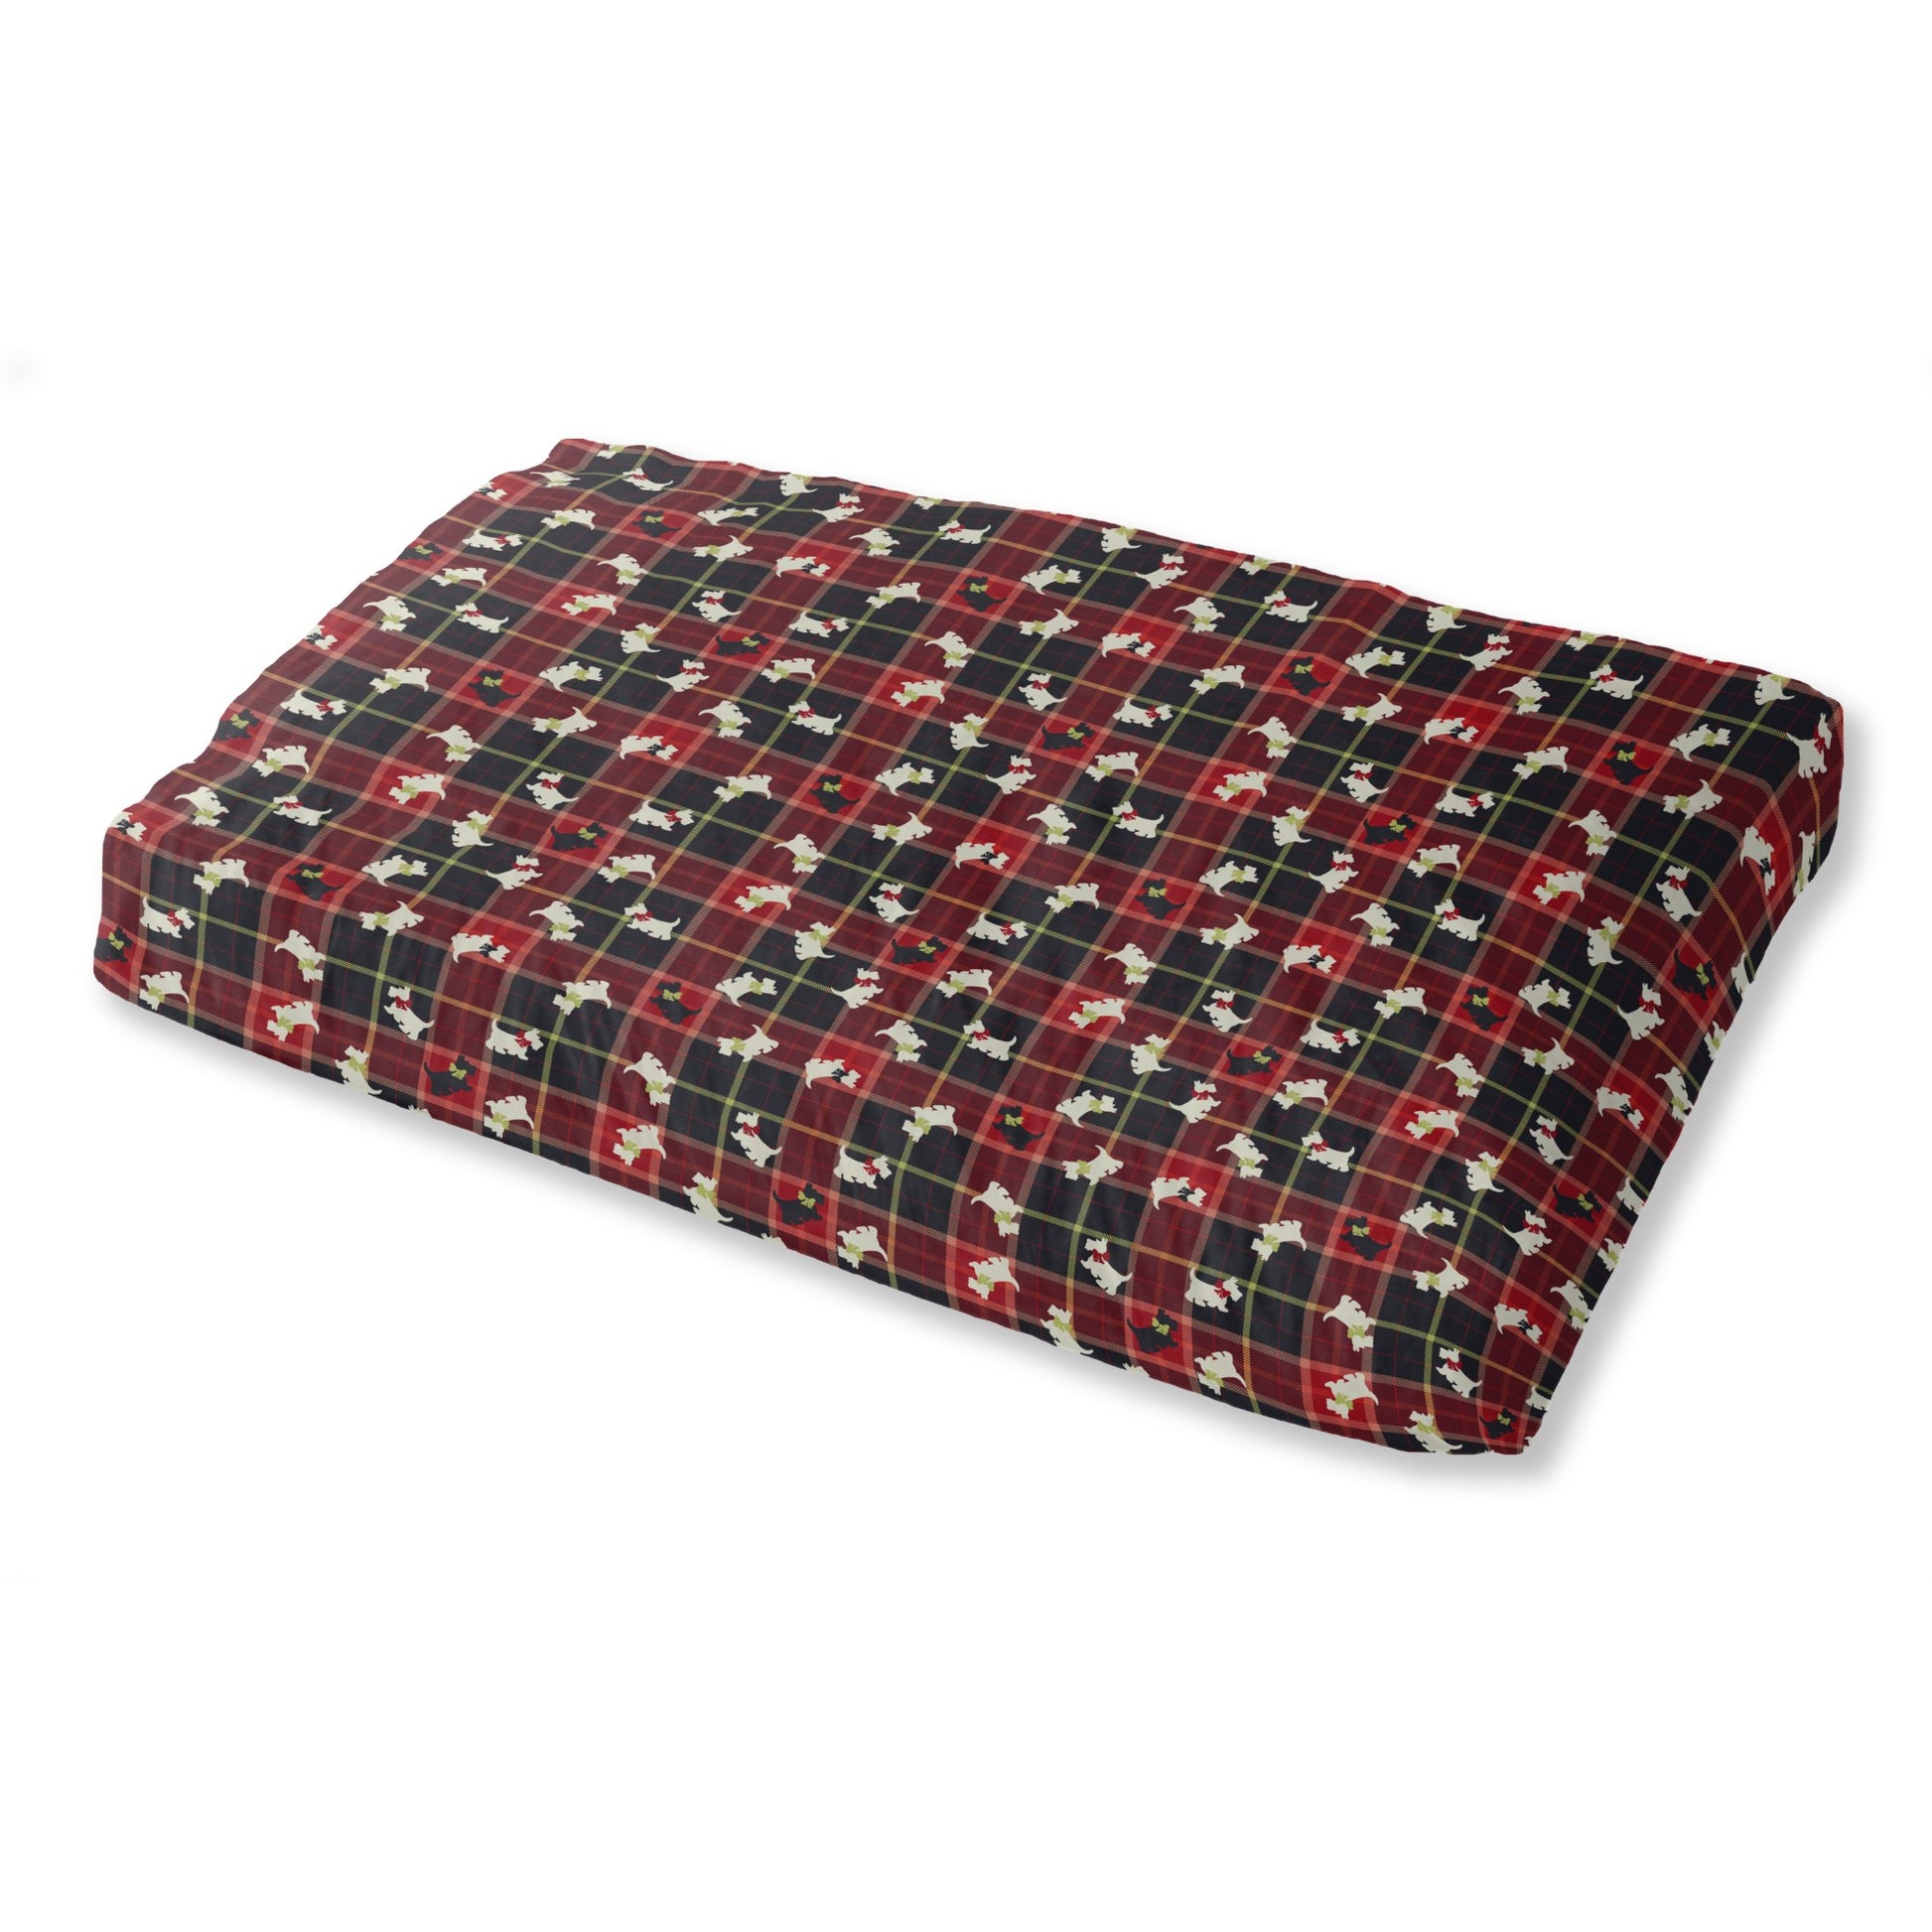 Scottie Plaid Pet Bed - various shades of green and red with gold or yellow mixed in, featuring light and dark colored scottie dogs in a pattern